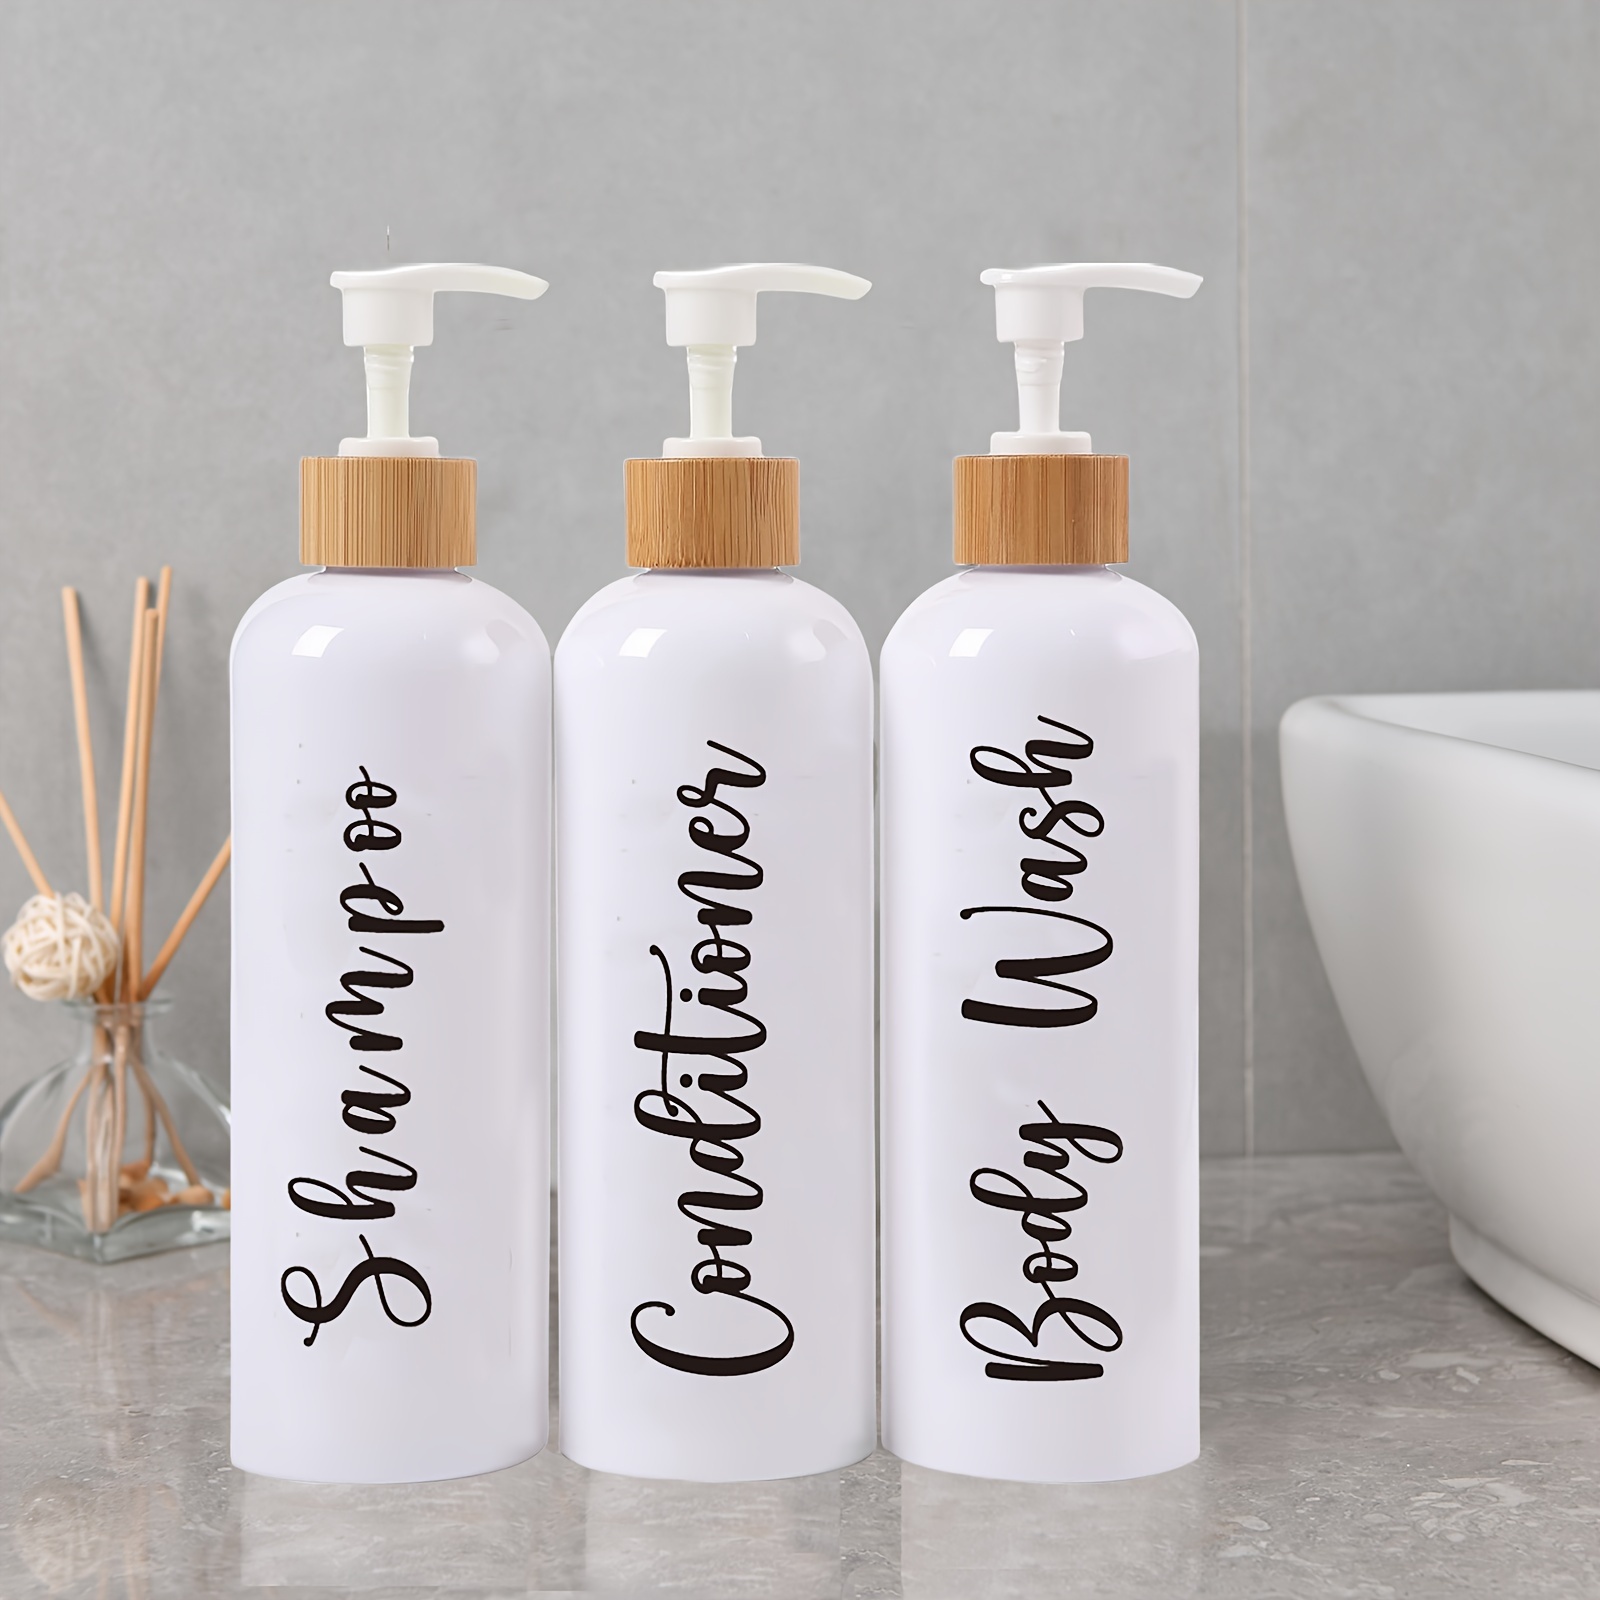 

3pcs Plastic Refillable Dispenser Bottles With Pumps, Waterproof Labels For Shampoo, Conditioner, Body Wash - Bathroom Countertop Essentials, Modern Home Decor